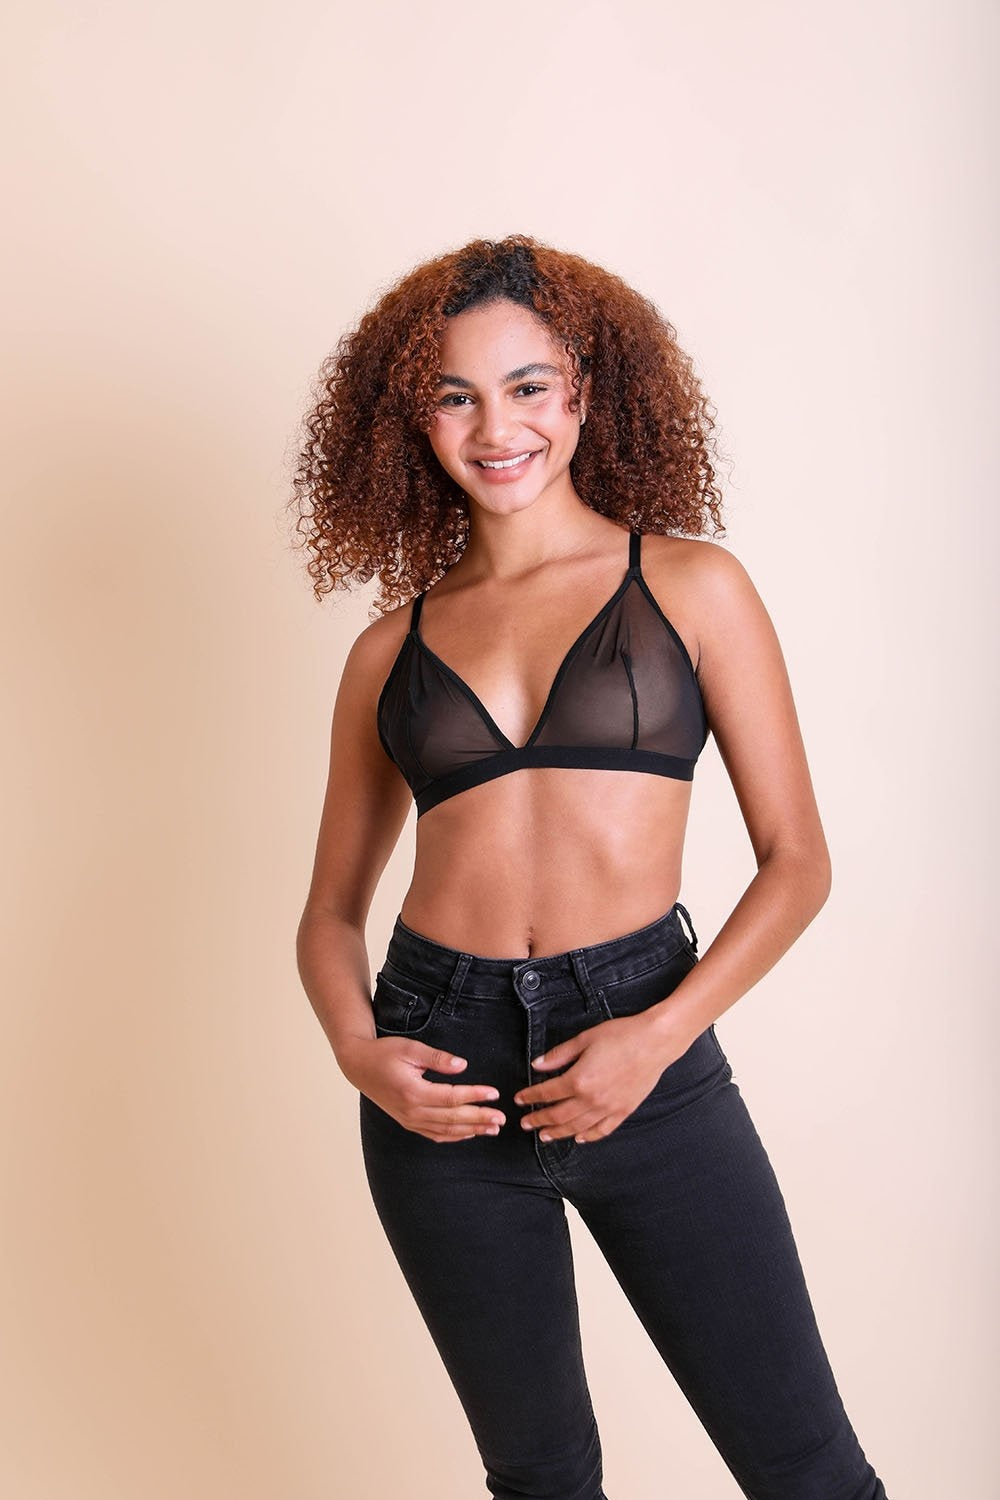 Leto Collection - Sheer Mesh Bralette $18 – Thank you